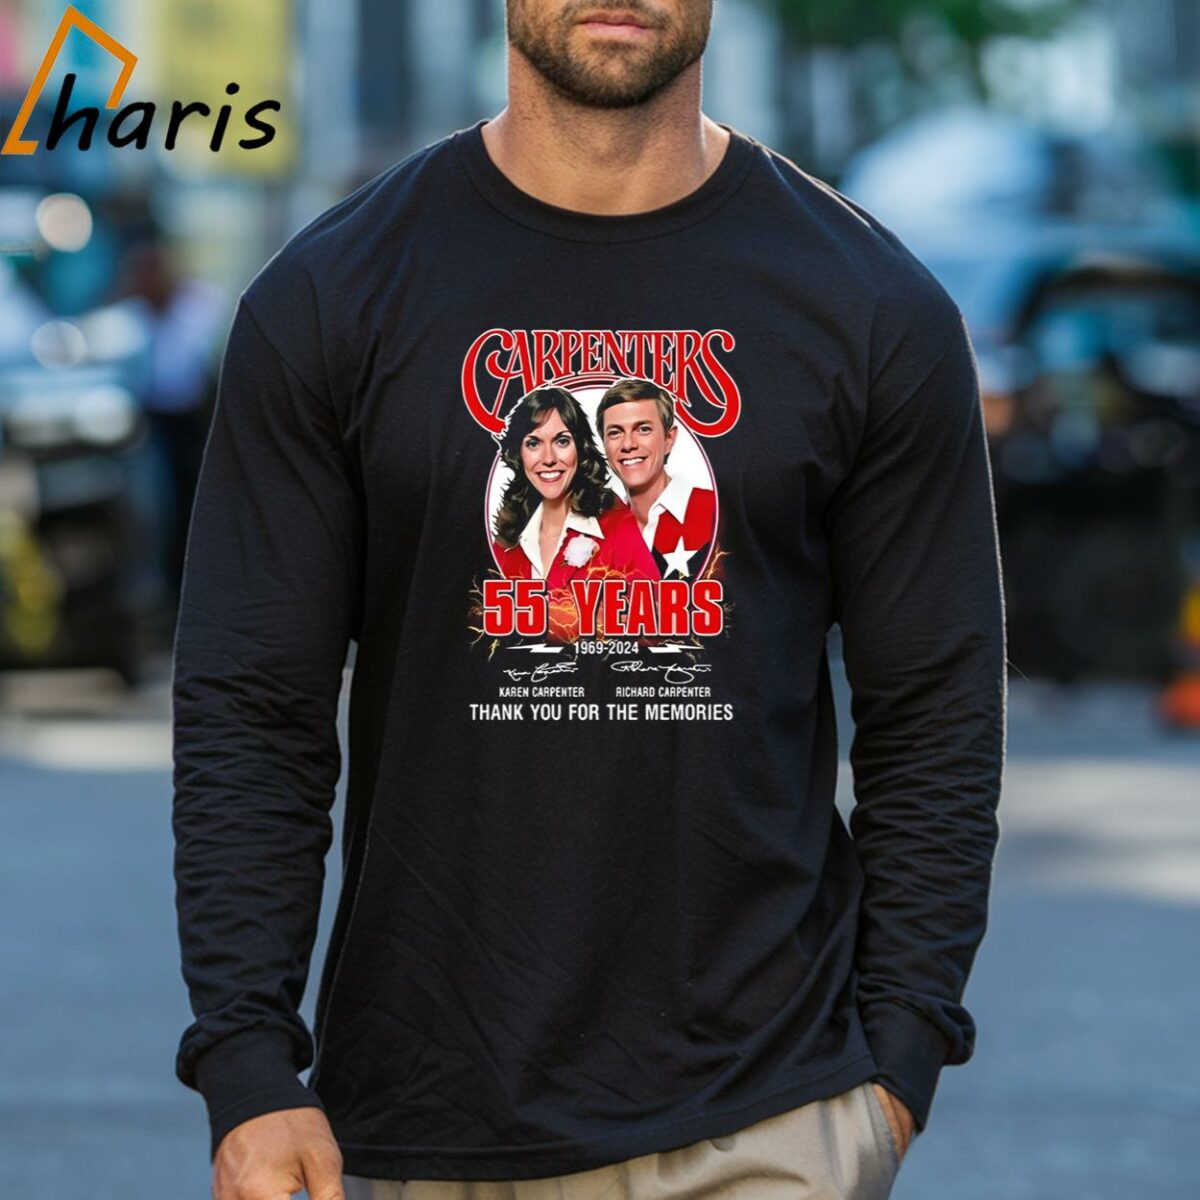 Carpenters 55 Years 1969 2024 Thank You For The Memories Signatures T shirt 3 Long sleeve shirt